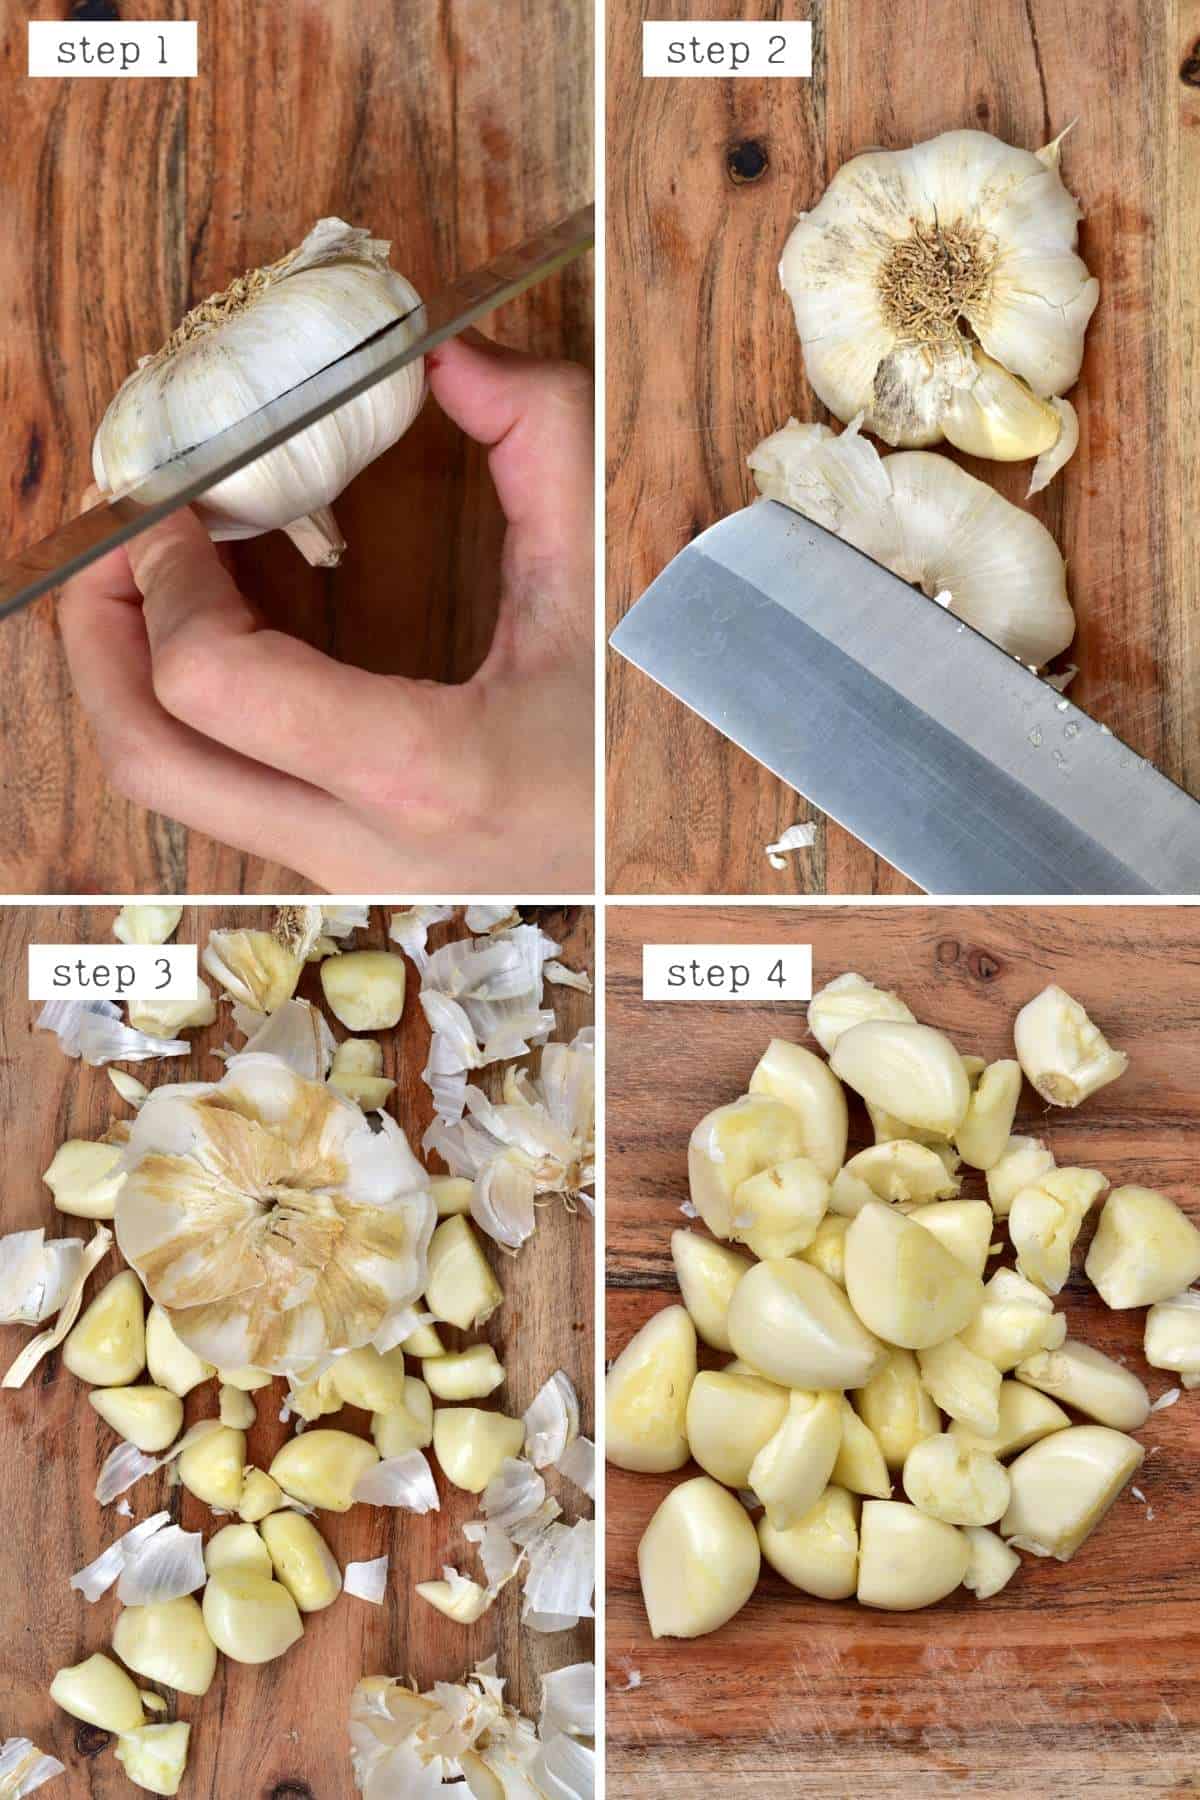 How to peel garlic - Method 2 by cutting through the middle